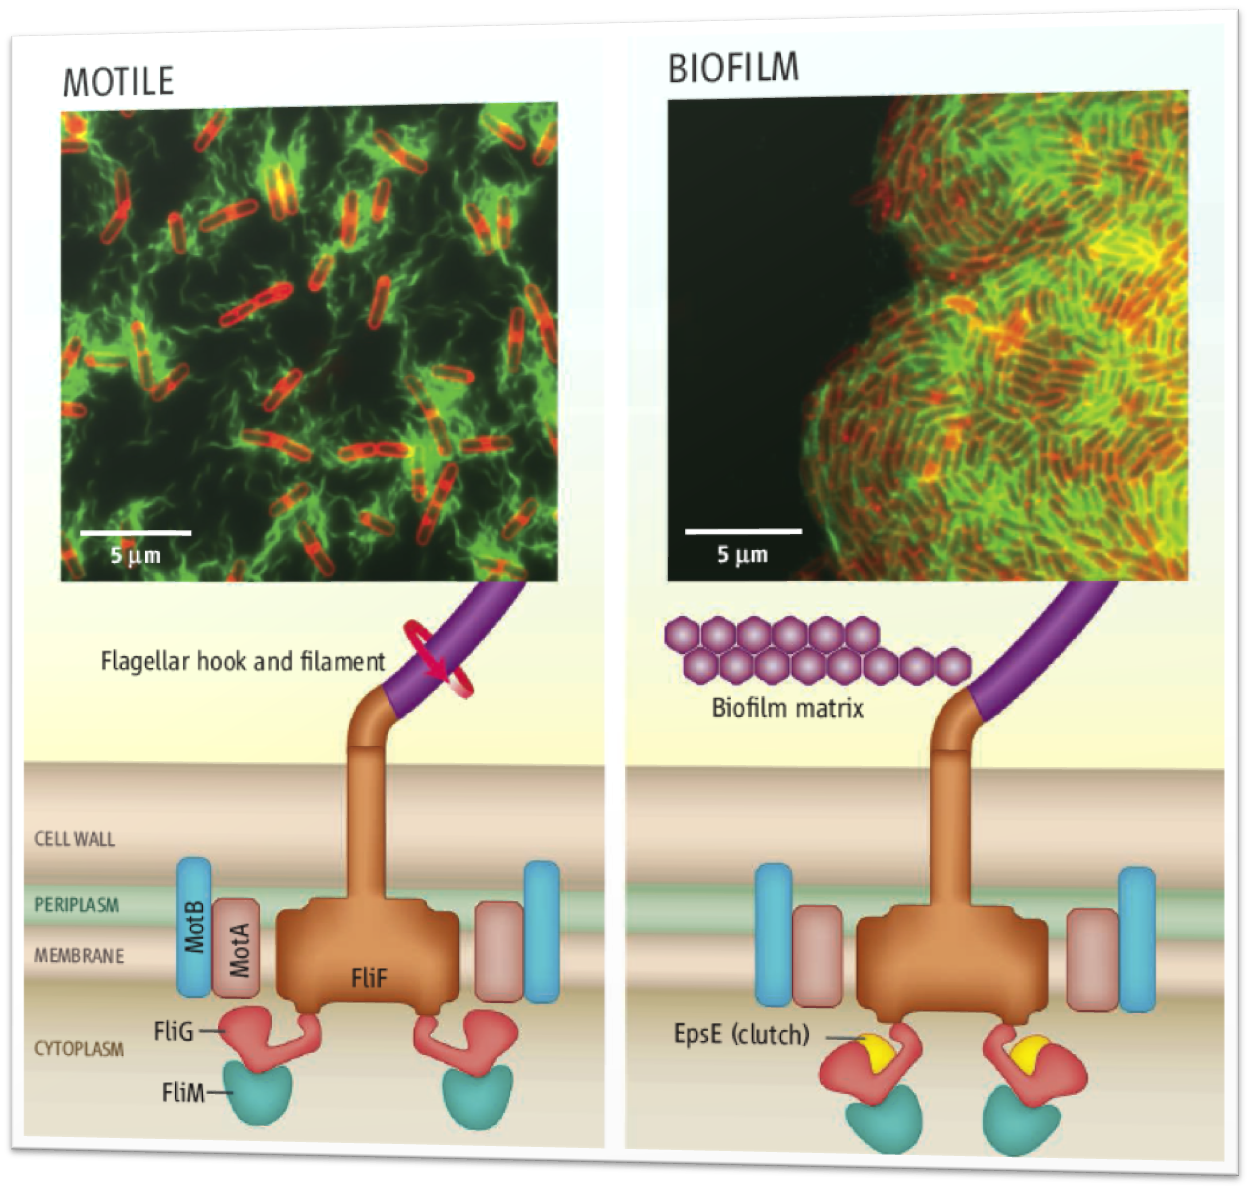 Motile B. subtilis cells are powered by interactions between protein complexes, generating torque for locomotion. The protein EpsE acts as a molecular clutch to disengage the flagellar motor, leaving the flagellum intact but unpowered. This quickly halts locomotion[1]